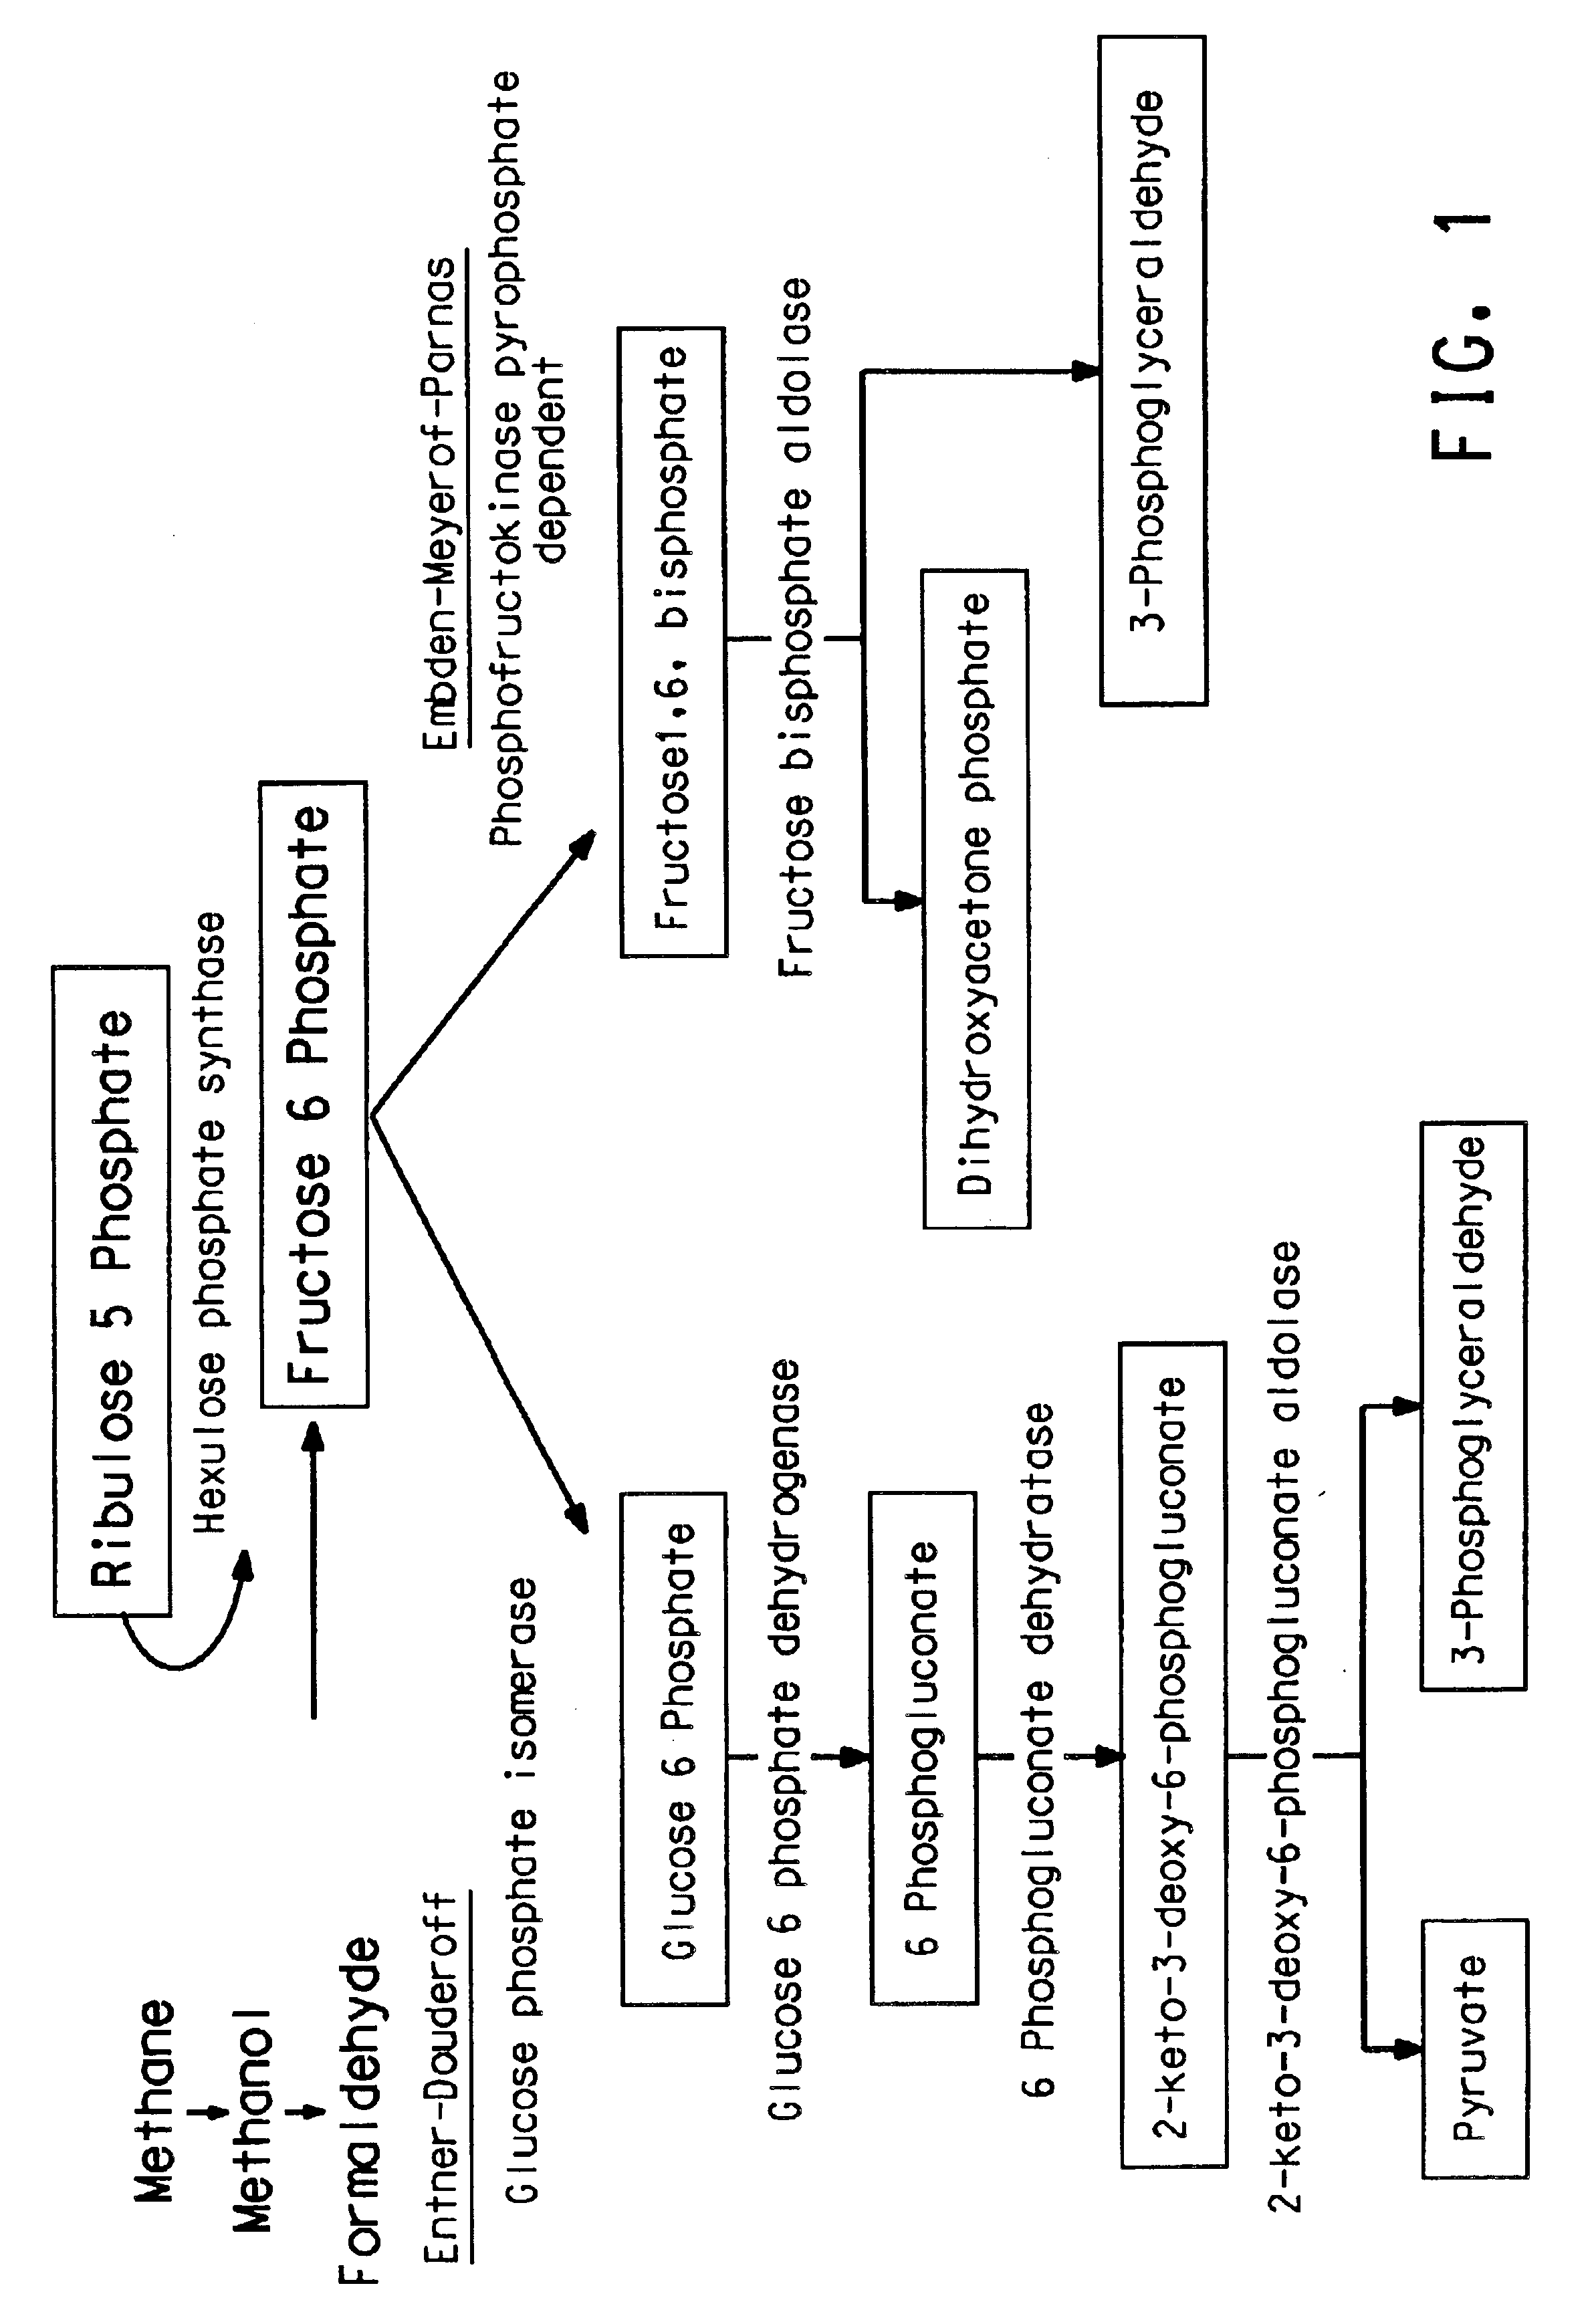 Methanotrophic carbon metabolism pathway genes and enzymes